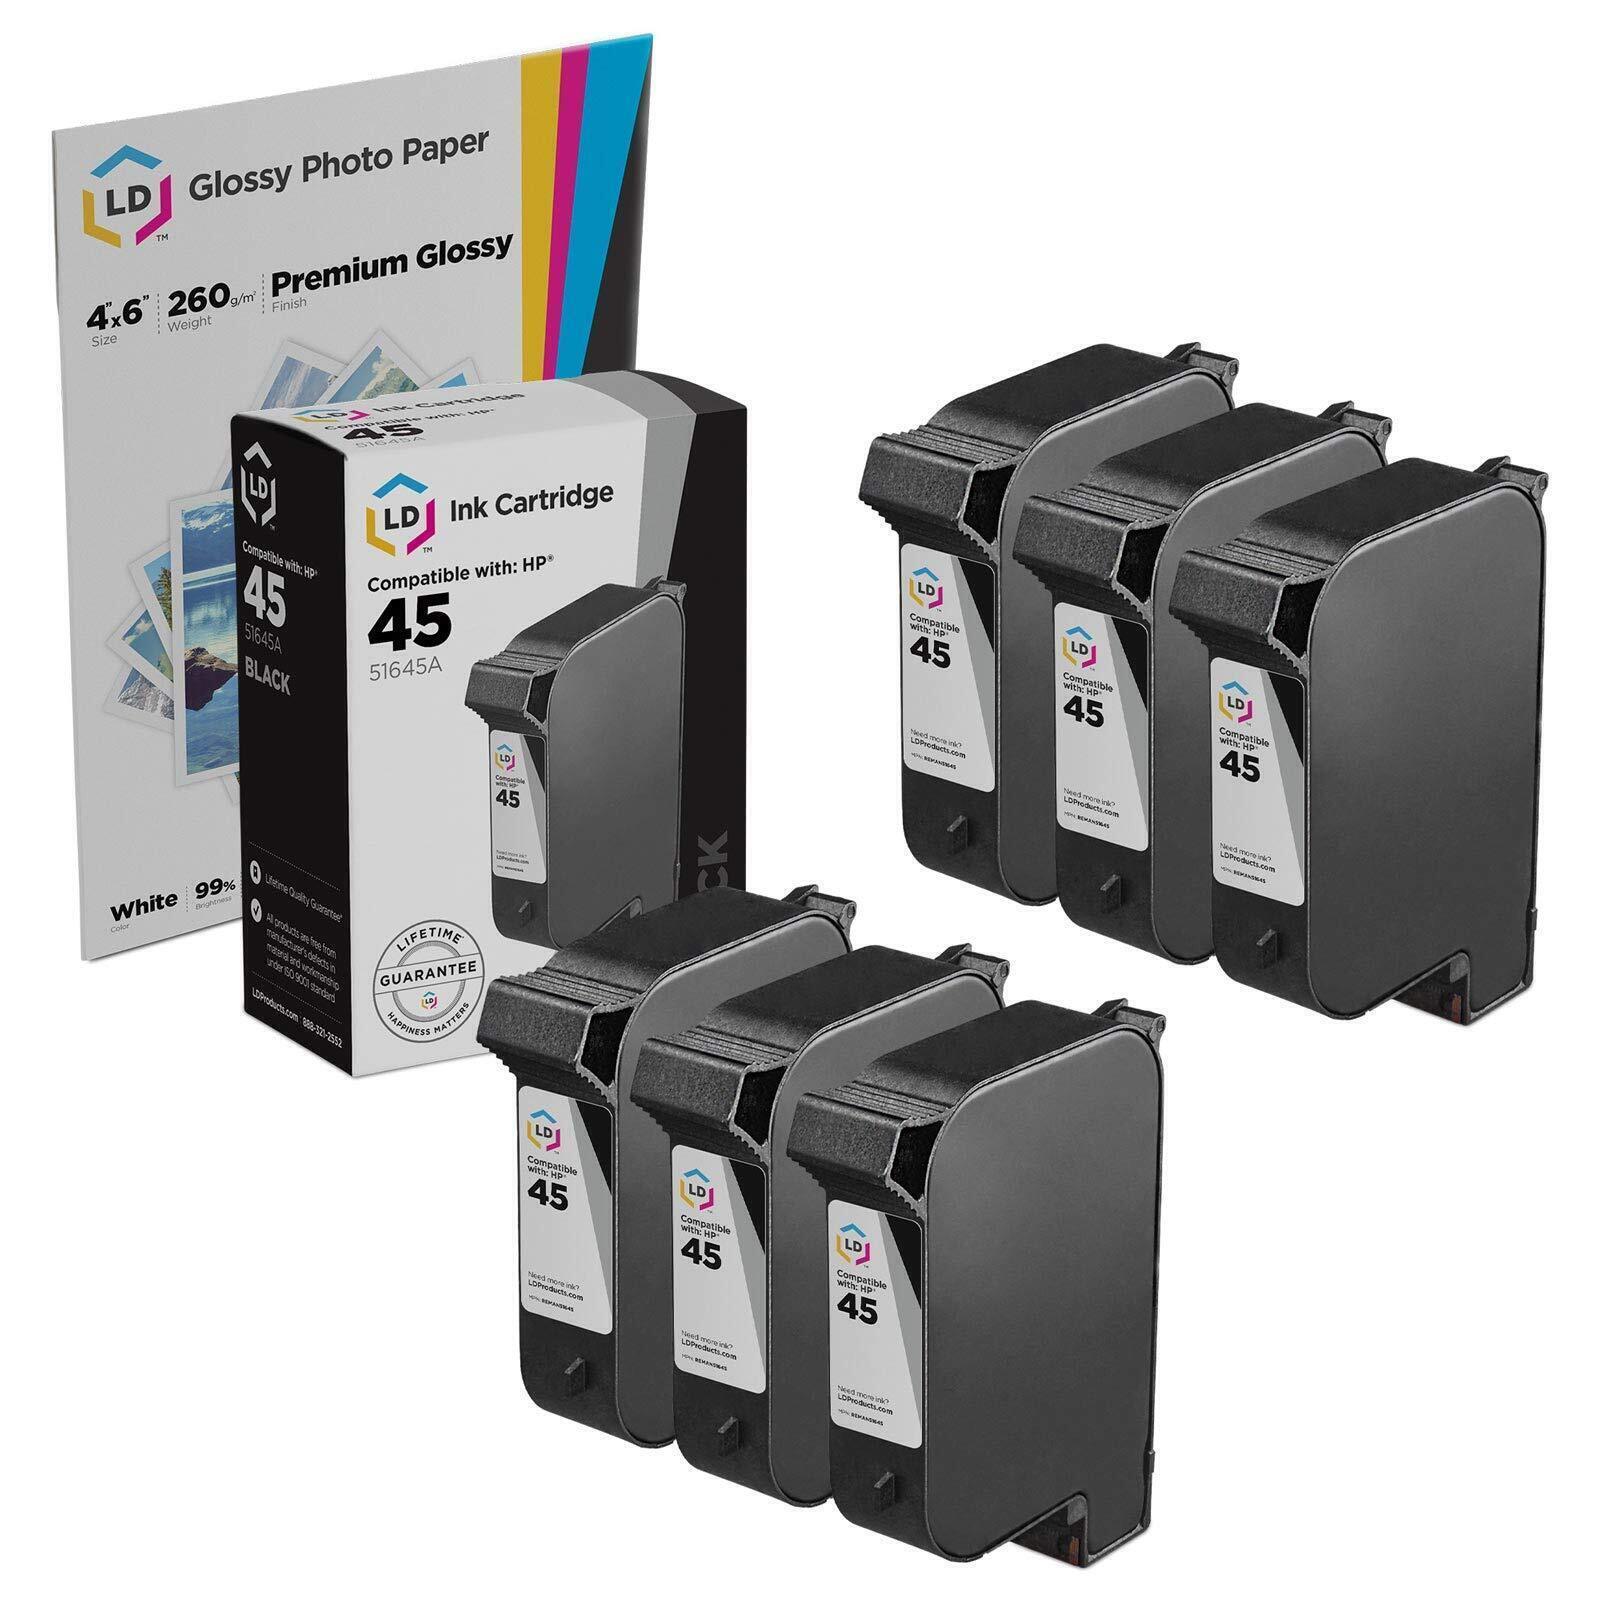 LD Reman Replacement Ink Cartridges Fits for HP 51645A (HP 45) Set of 6 Black